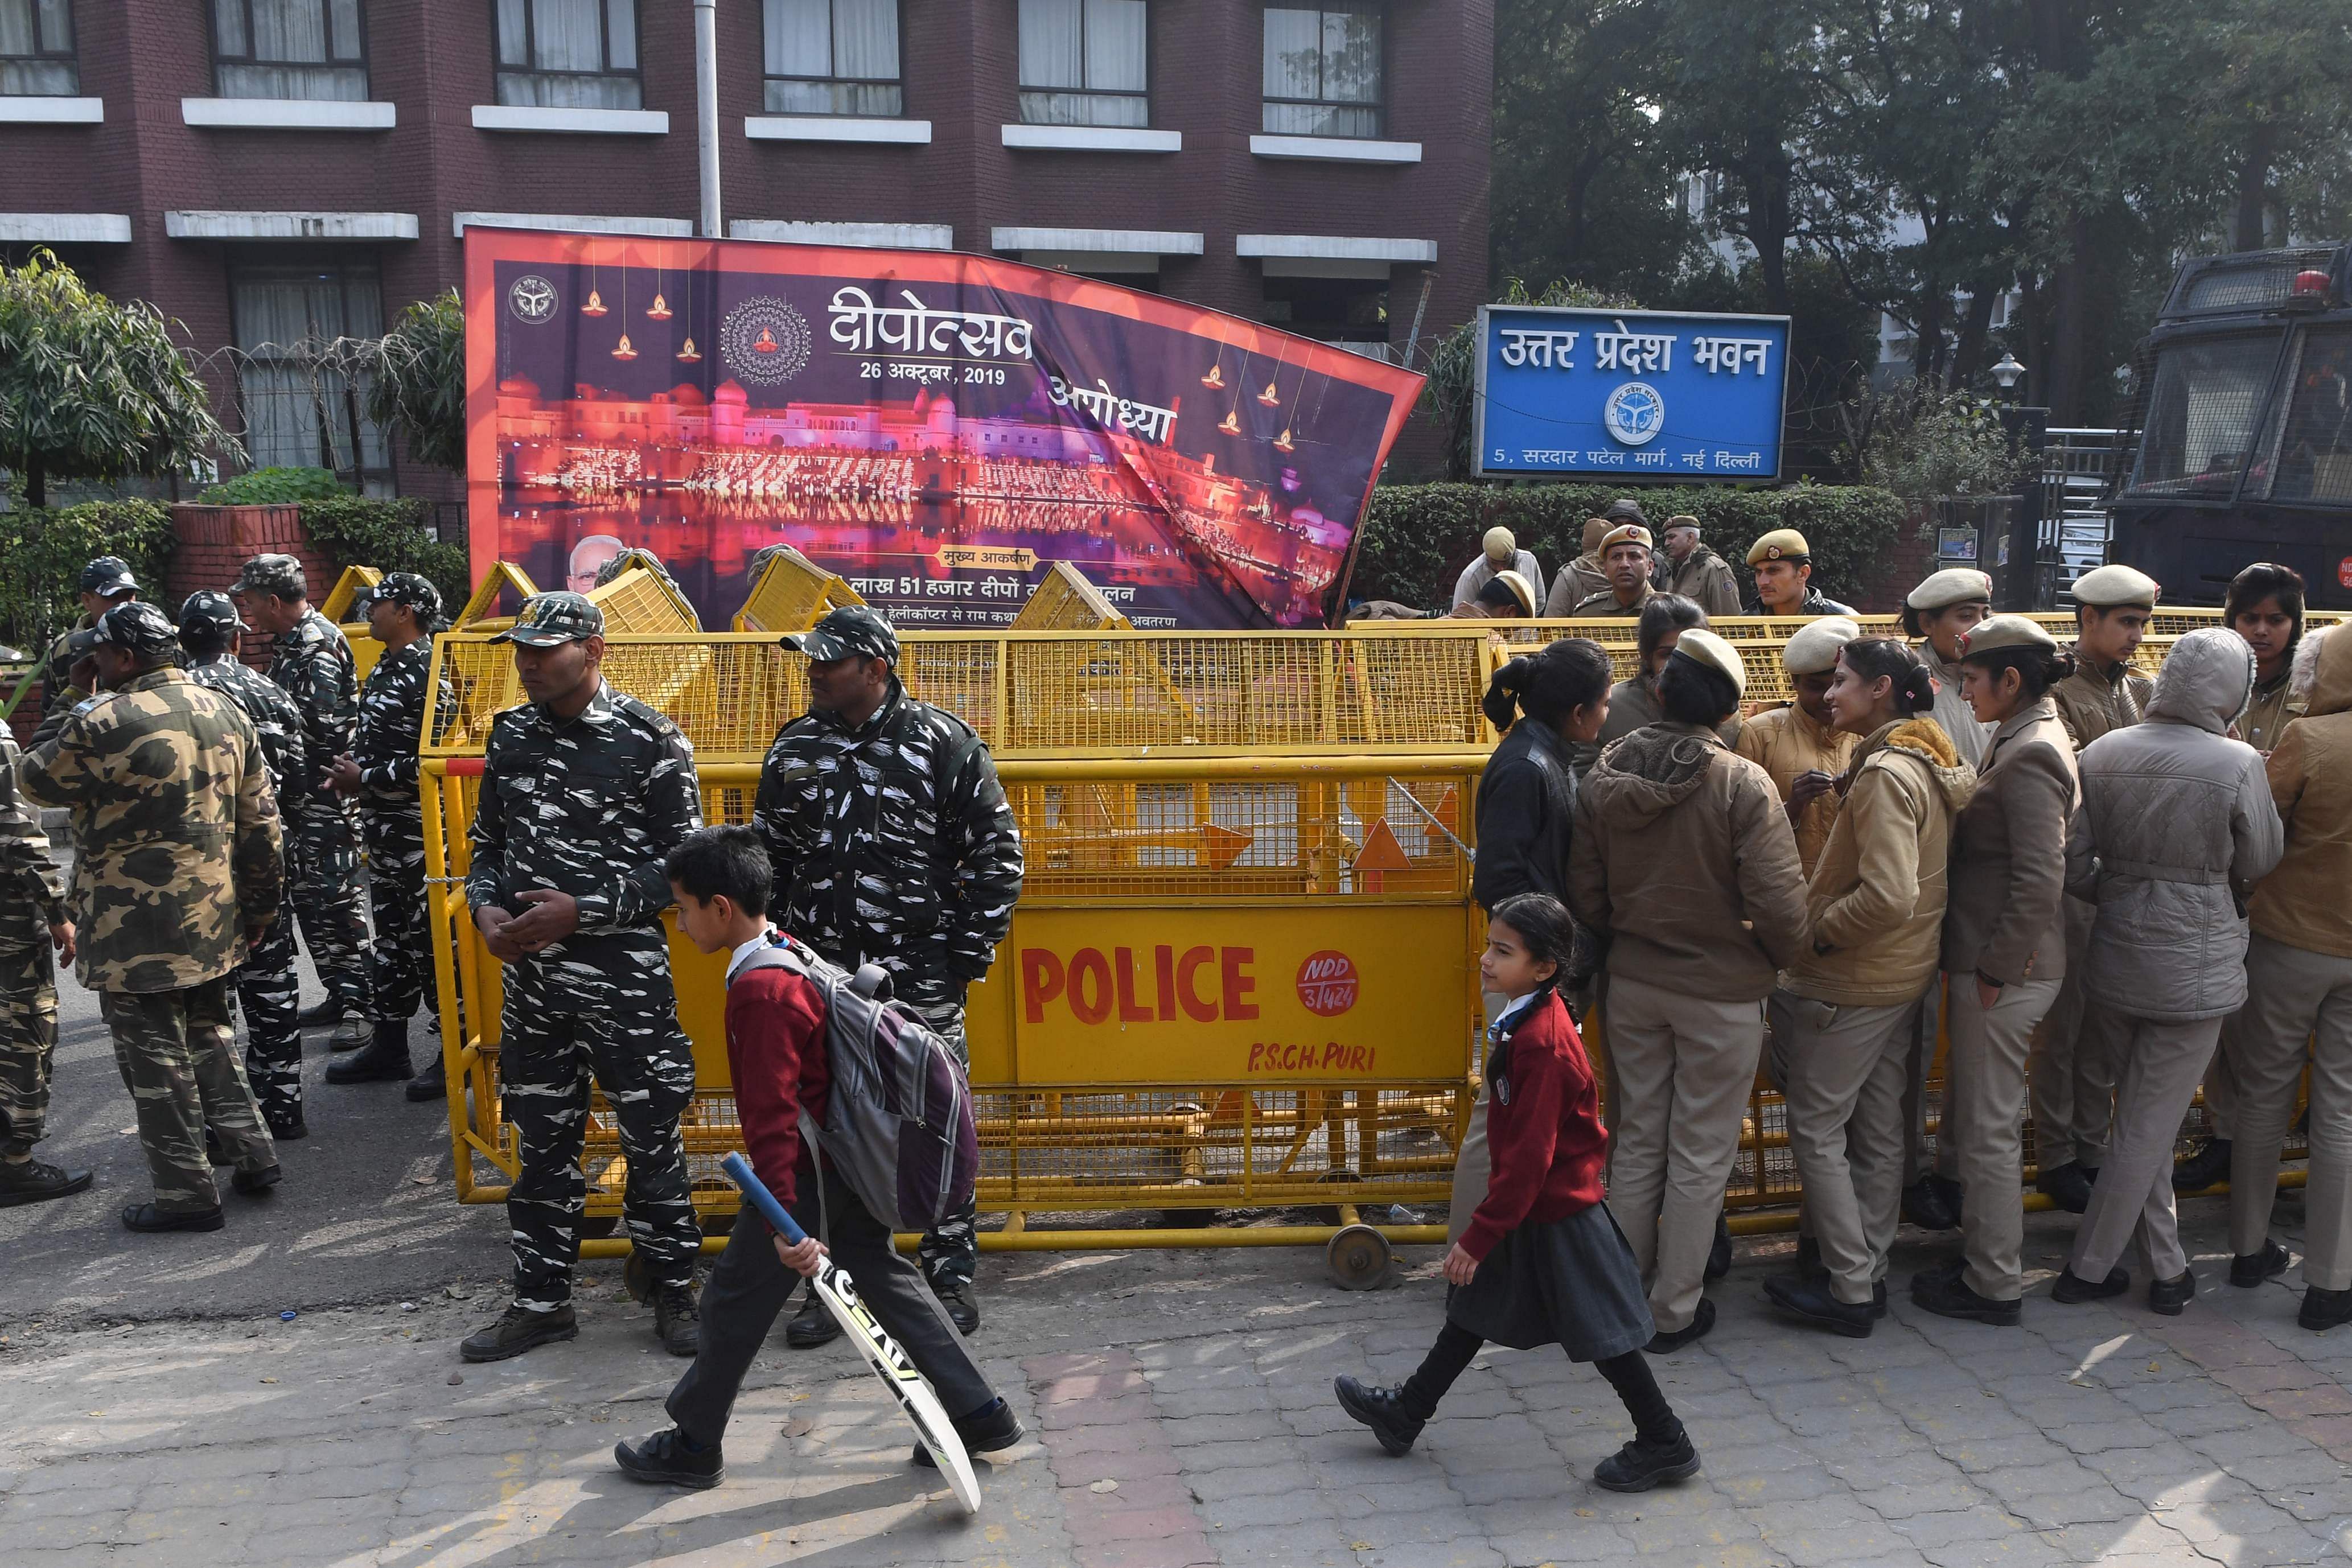 Schoolchildren walk past police outside the Uttar Pradesh Bhawan (state house) during a demonstration against the crackdown on protesters in Uttar Pradesh state. (AFP Photo)